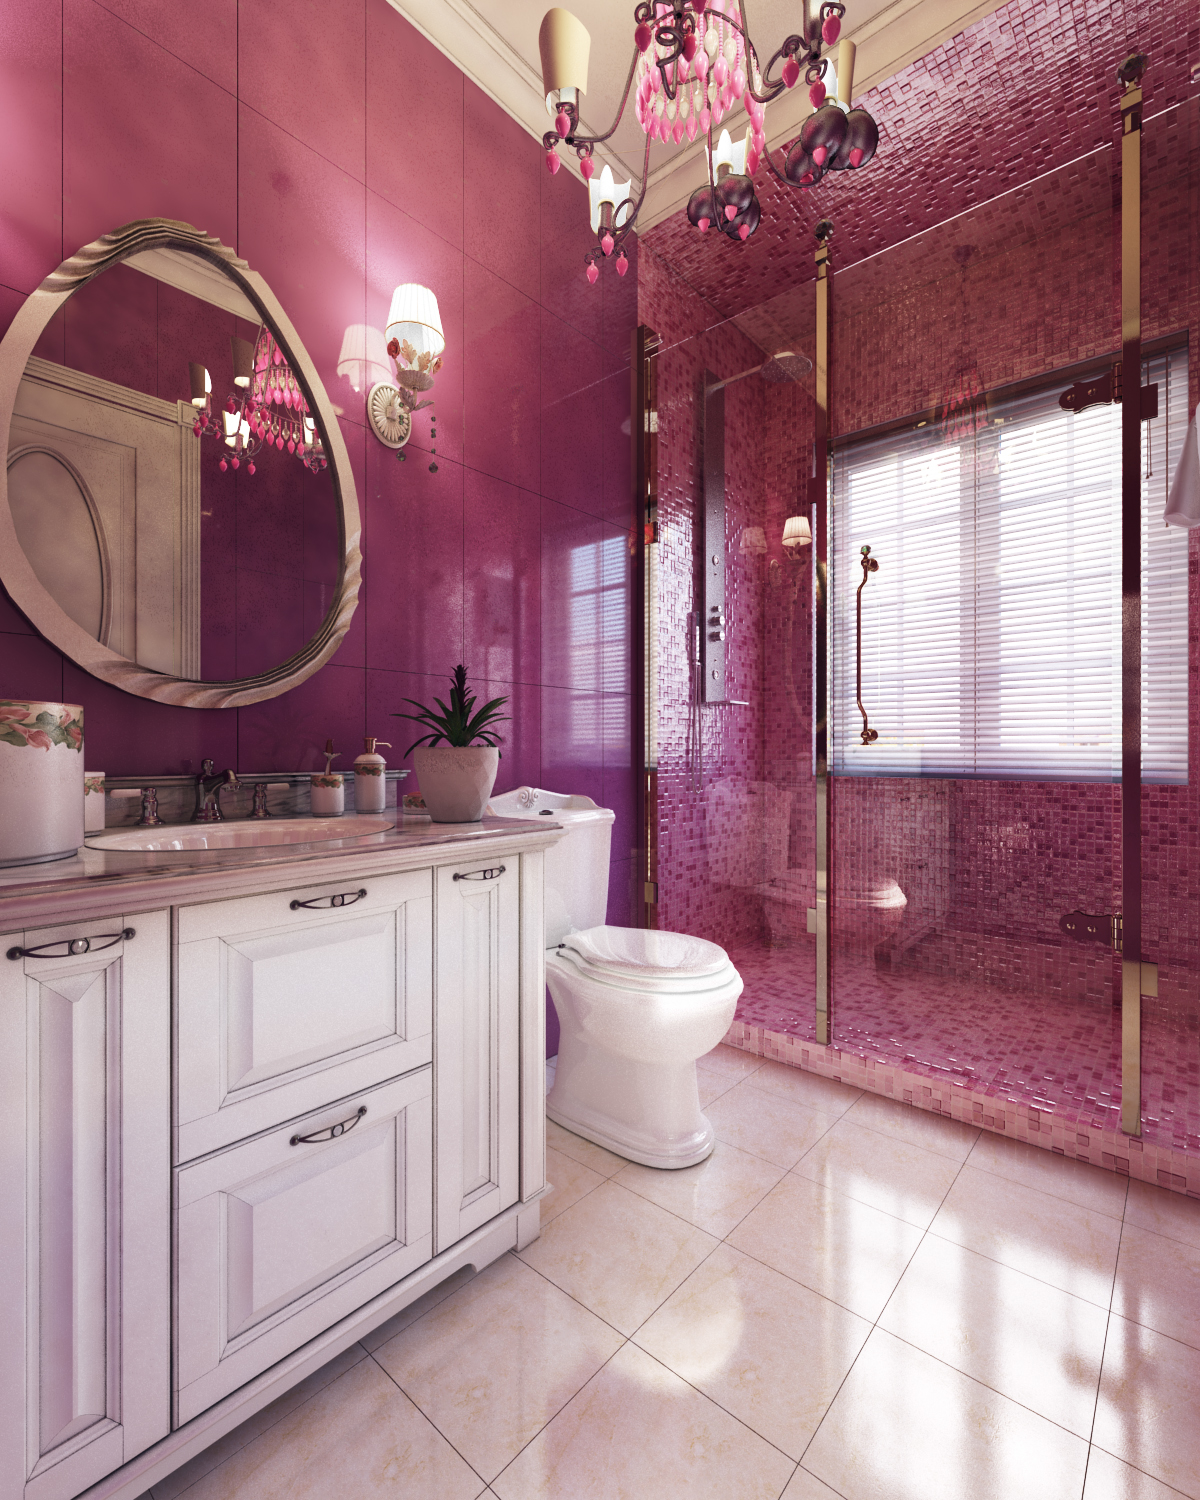 beautiful wall paint for bathroom "width =" 1200 "height =" 1500 "srcset =" https://mileray.com/wp-content/uploads/2020/05/1588514953_970_Decorating-Small-Bathroom-Designs-With-Colorful-Paint-Wall-Making-It.jpg 1200w, https: // myfashionos .com / wp-content / uploads / 2016/08 / Koj-Design2-1-240x300.jpg 240w, https://mileray.com/wp-content/uploads/2016/08/Koj-Design2-1-768x960. jpg 768w, https://mileray.com/wp-content/uploads/2016/08/Koj-Design2-1-819x1024.jpg 819w, https://mileray.com/wp-content/uploads/2016/08 / Koj-Design2-1-696x870.jpg 696w, https://mileray.com/wp-content/uploads/2016/08/Koj-Design2-1-1068x1335.jpg 1068w, https://mileray.com/wp - content / uploads / 2016/08 / Koj-Design2-1-336x420.jpg 336w "sizes =" (maximum width: 1200px) 100vw, 1200px